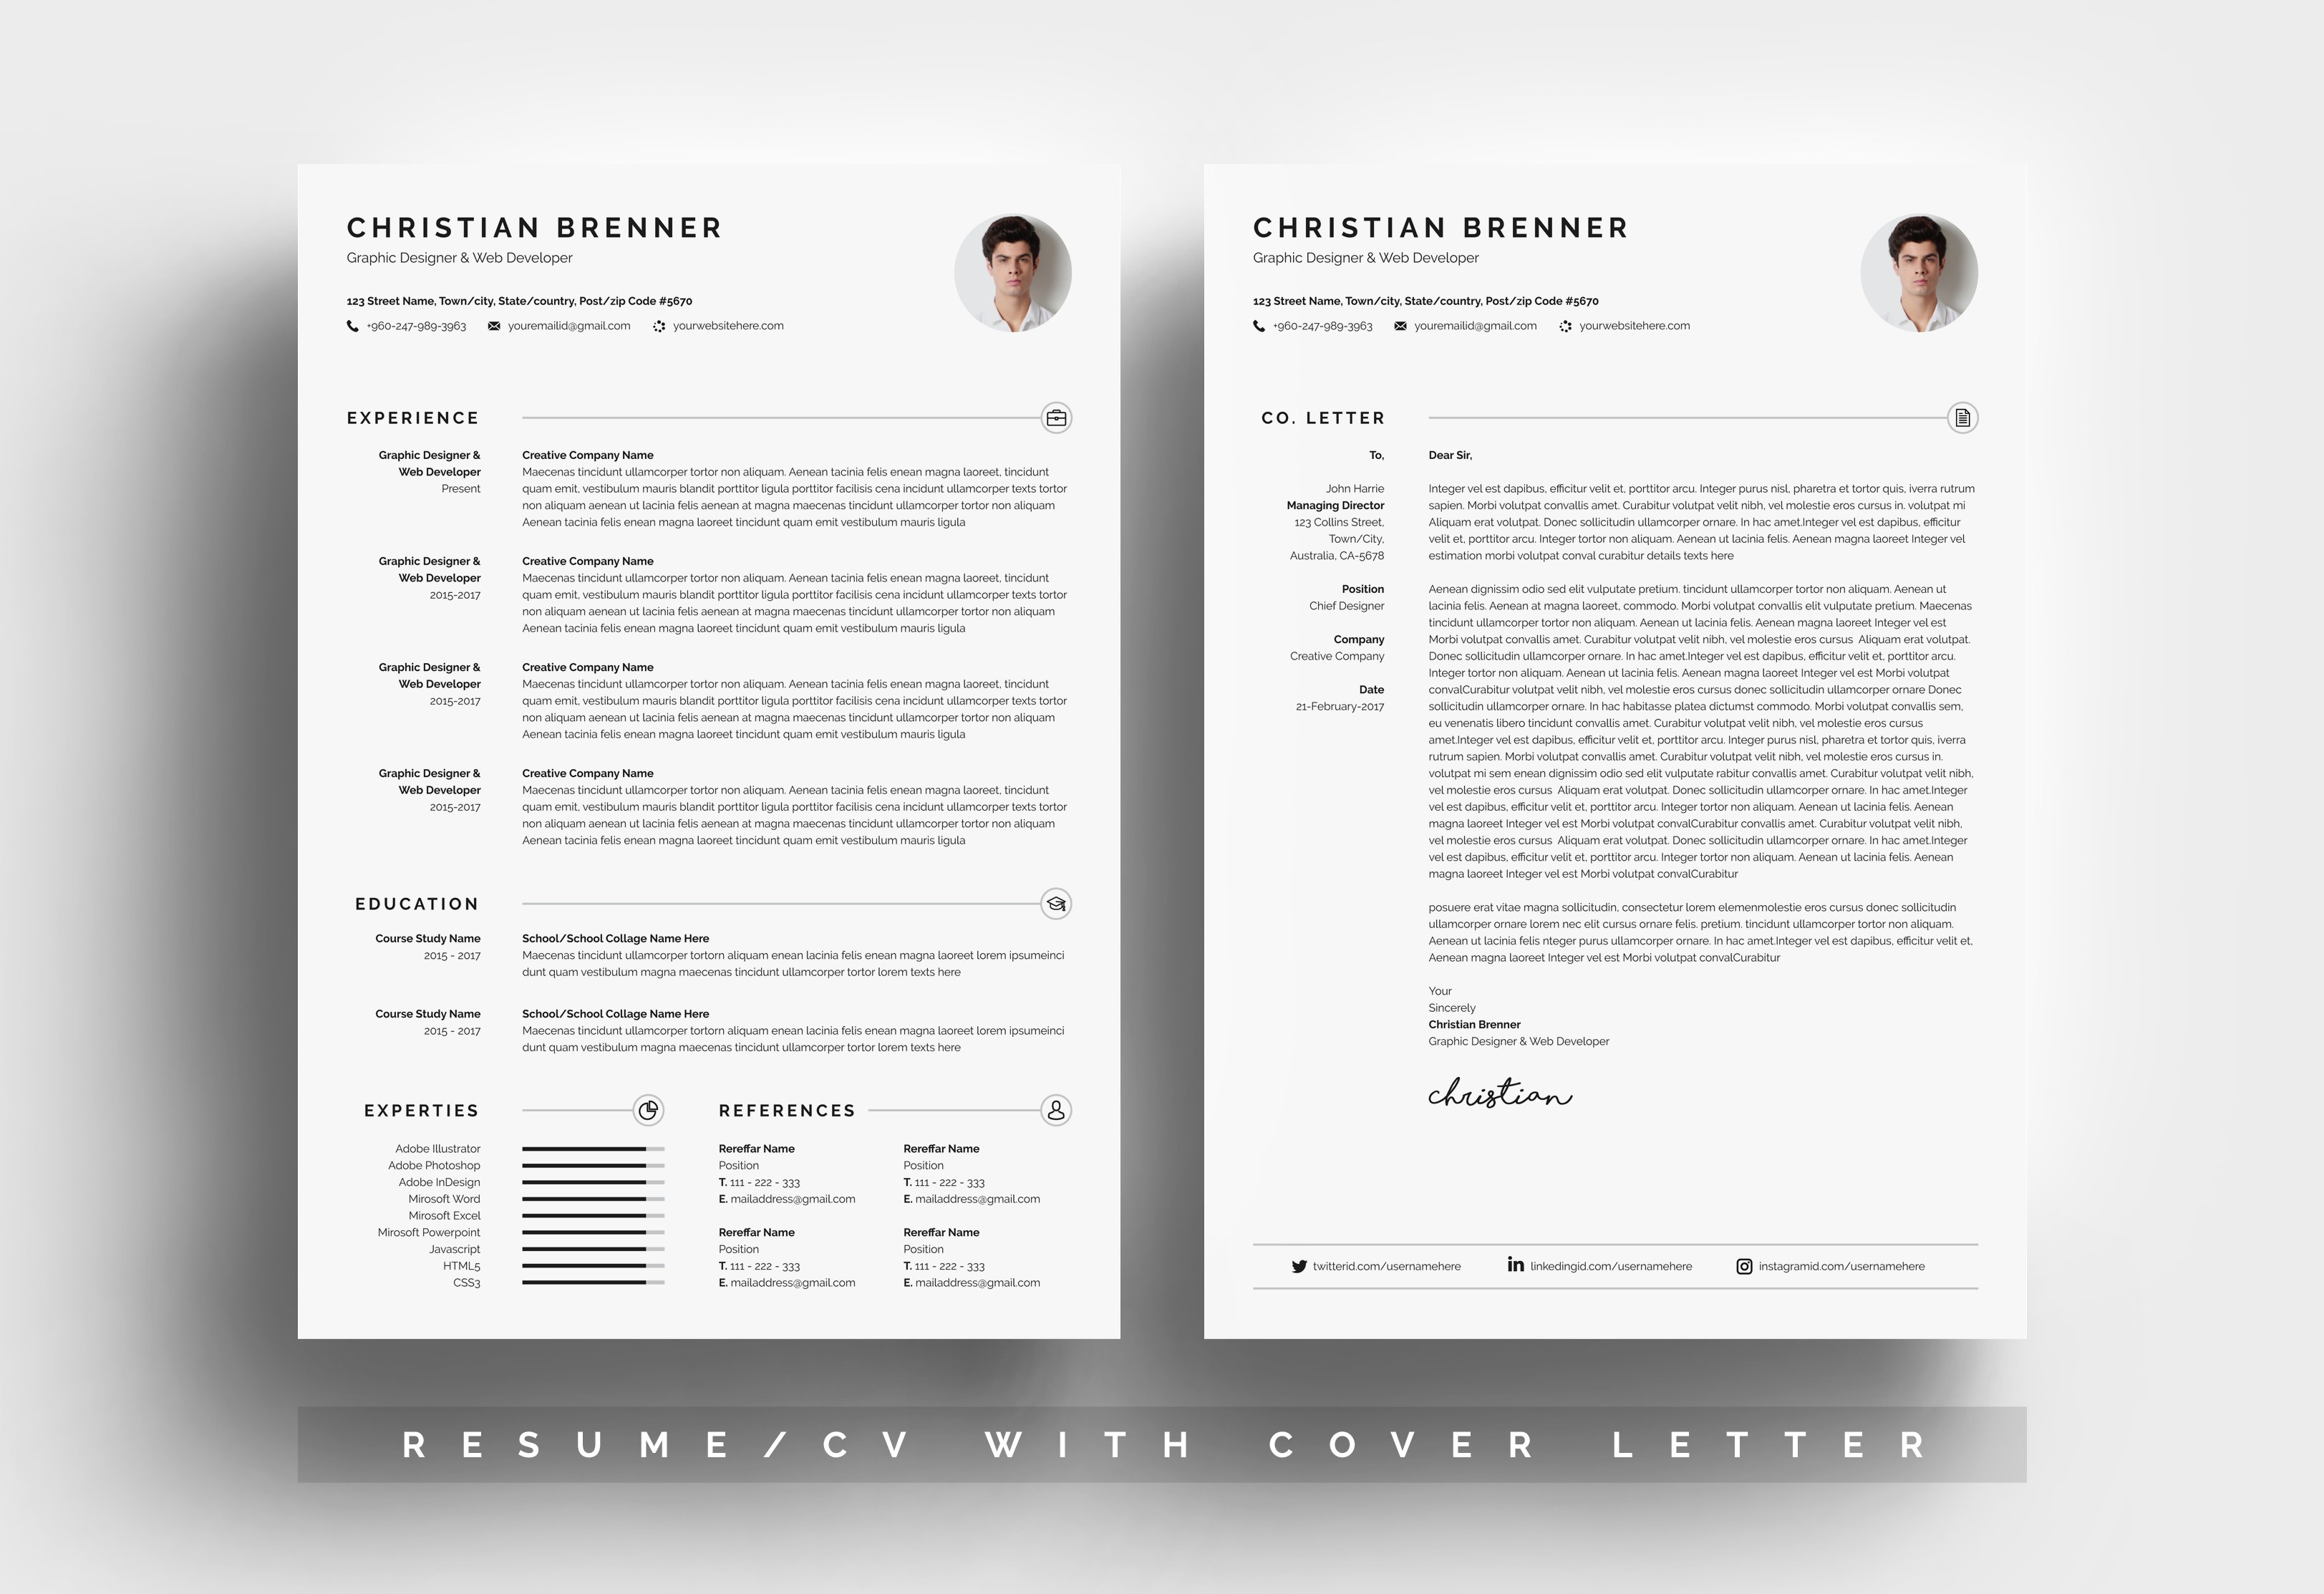 Clean Resume/CV With Cover Letter preview image.